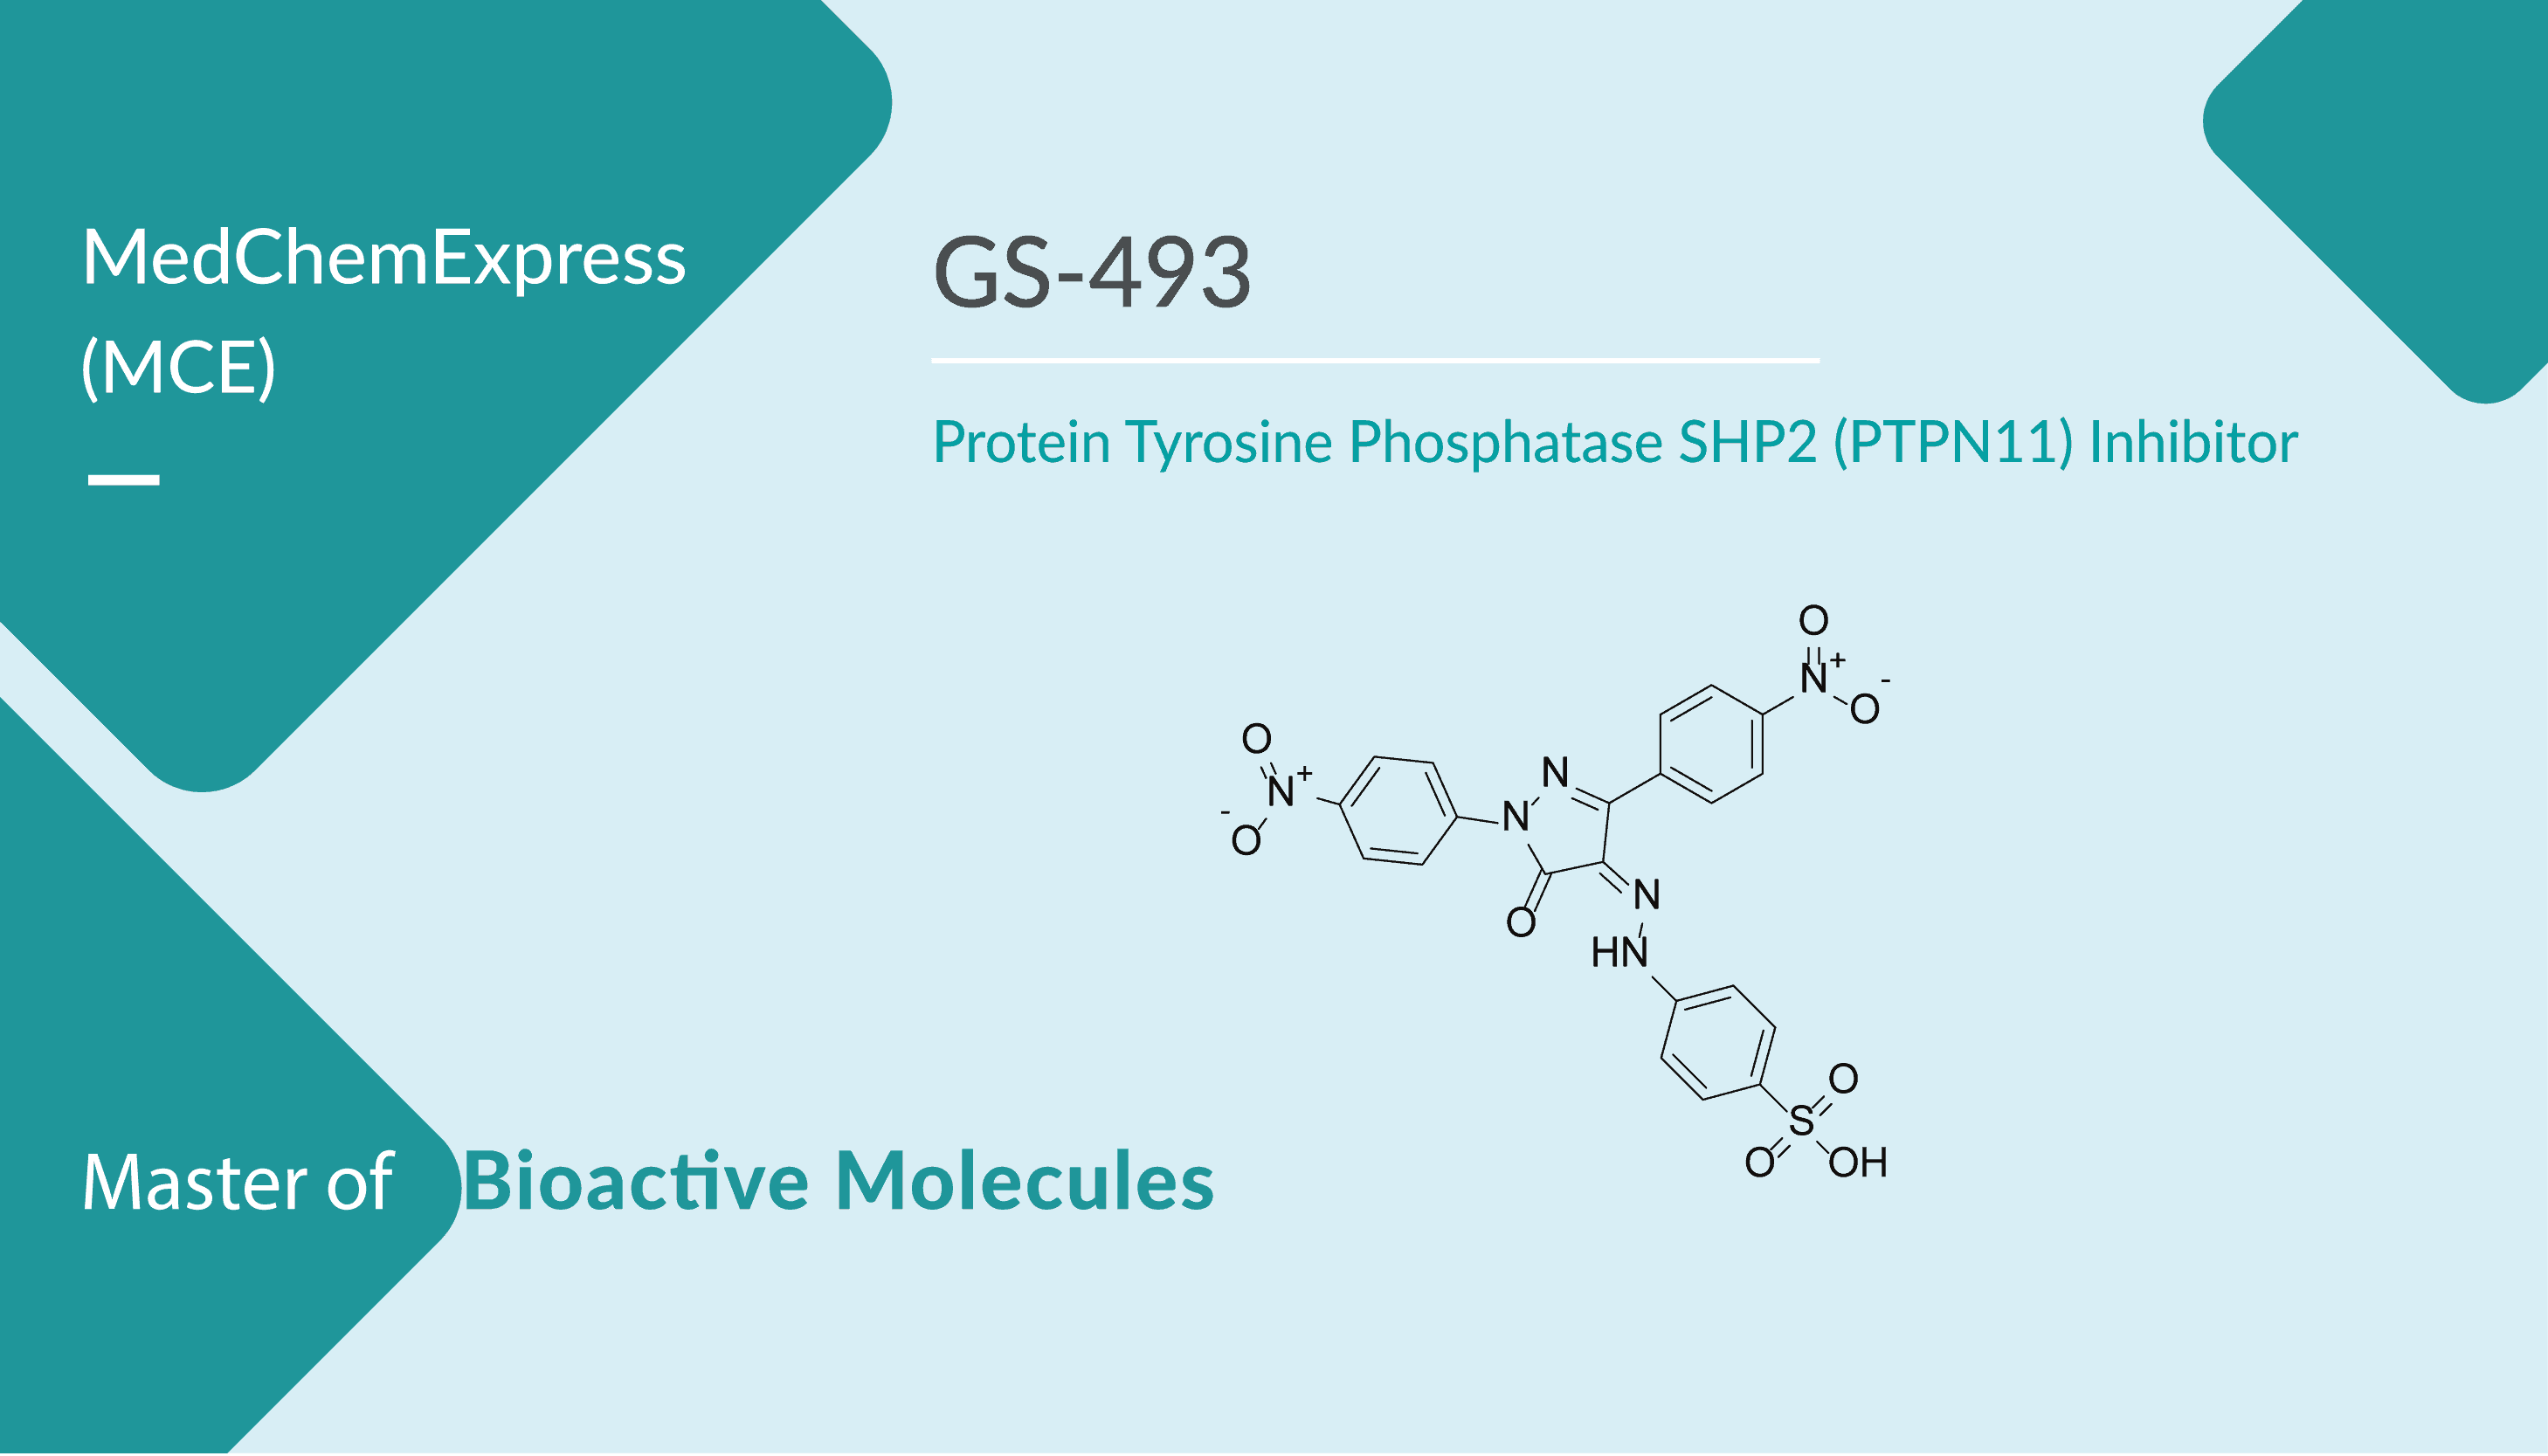 GS 493 is a Selective Protein Tyrosine Phosphatase SHP2 PTPN11 Inhibitor 2022 02 03 - GS-493 is a Selective Protein Tyrosine Phosphatase SHP2 (PTPN11) Inhibitor